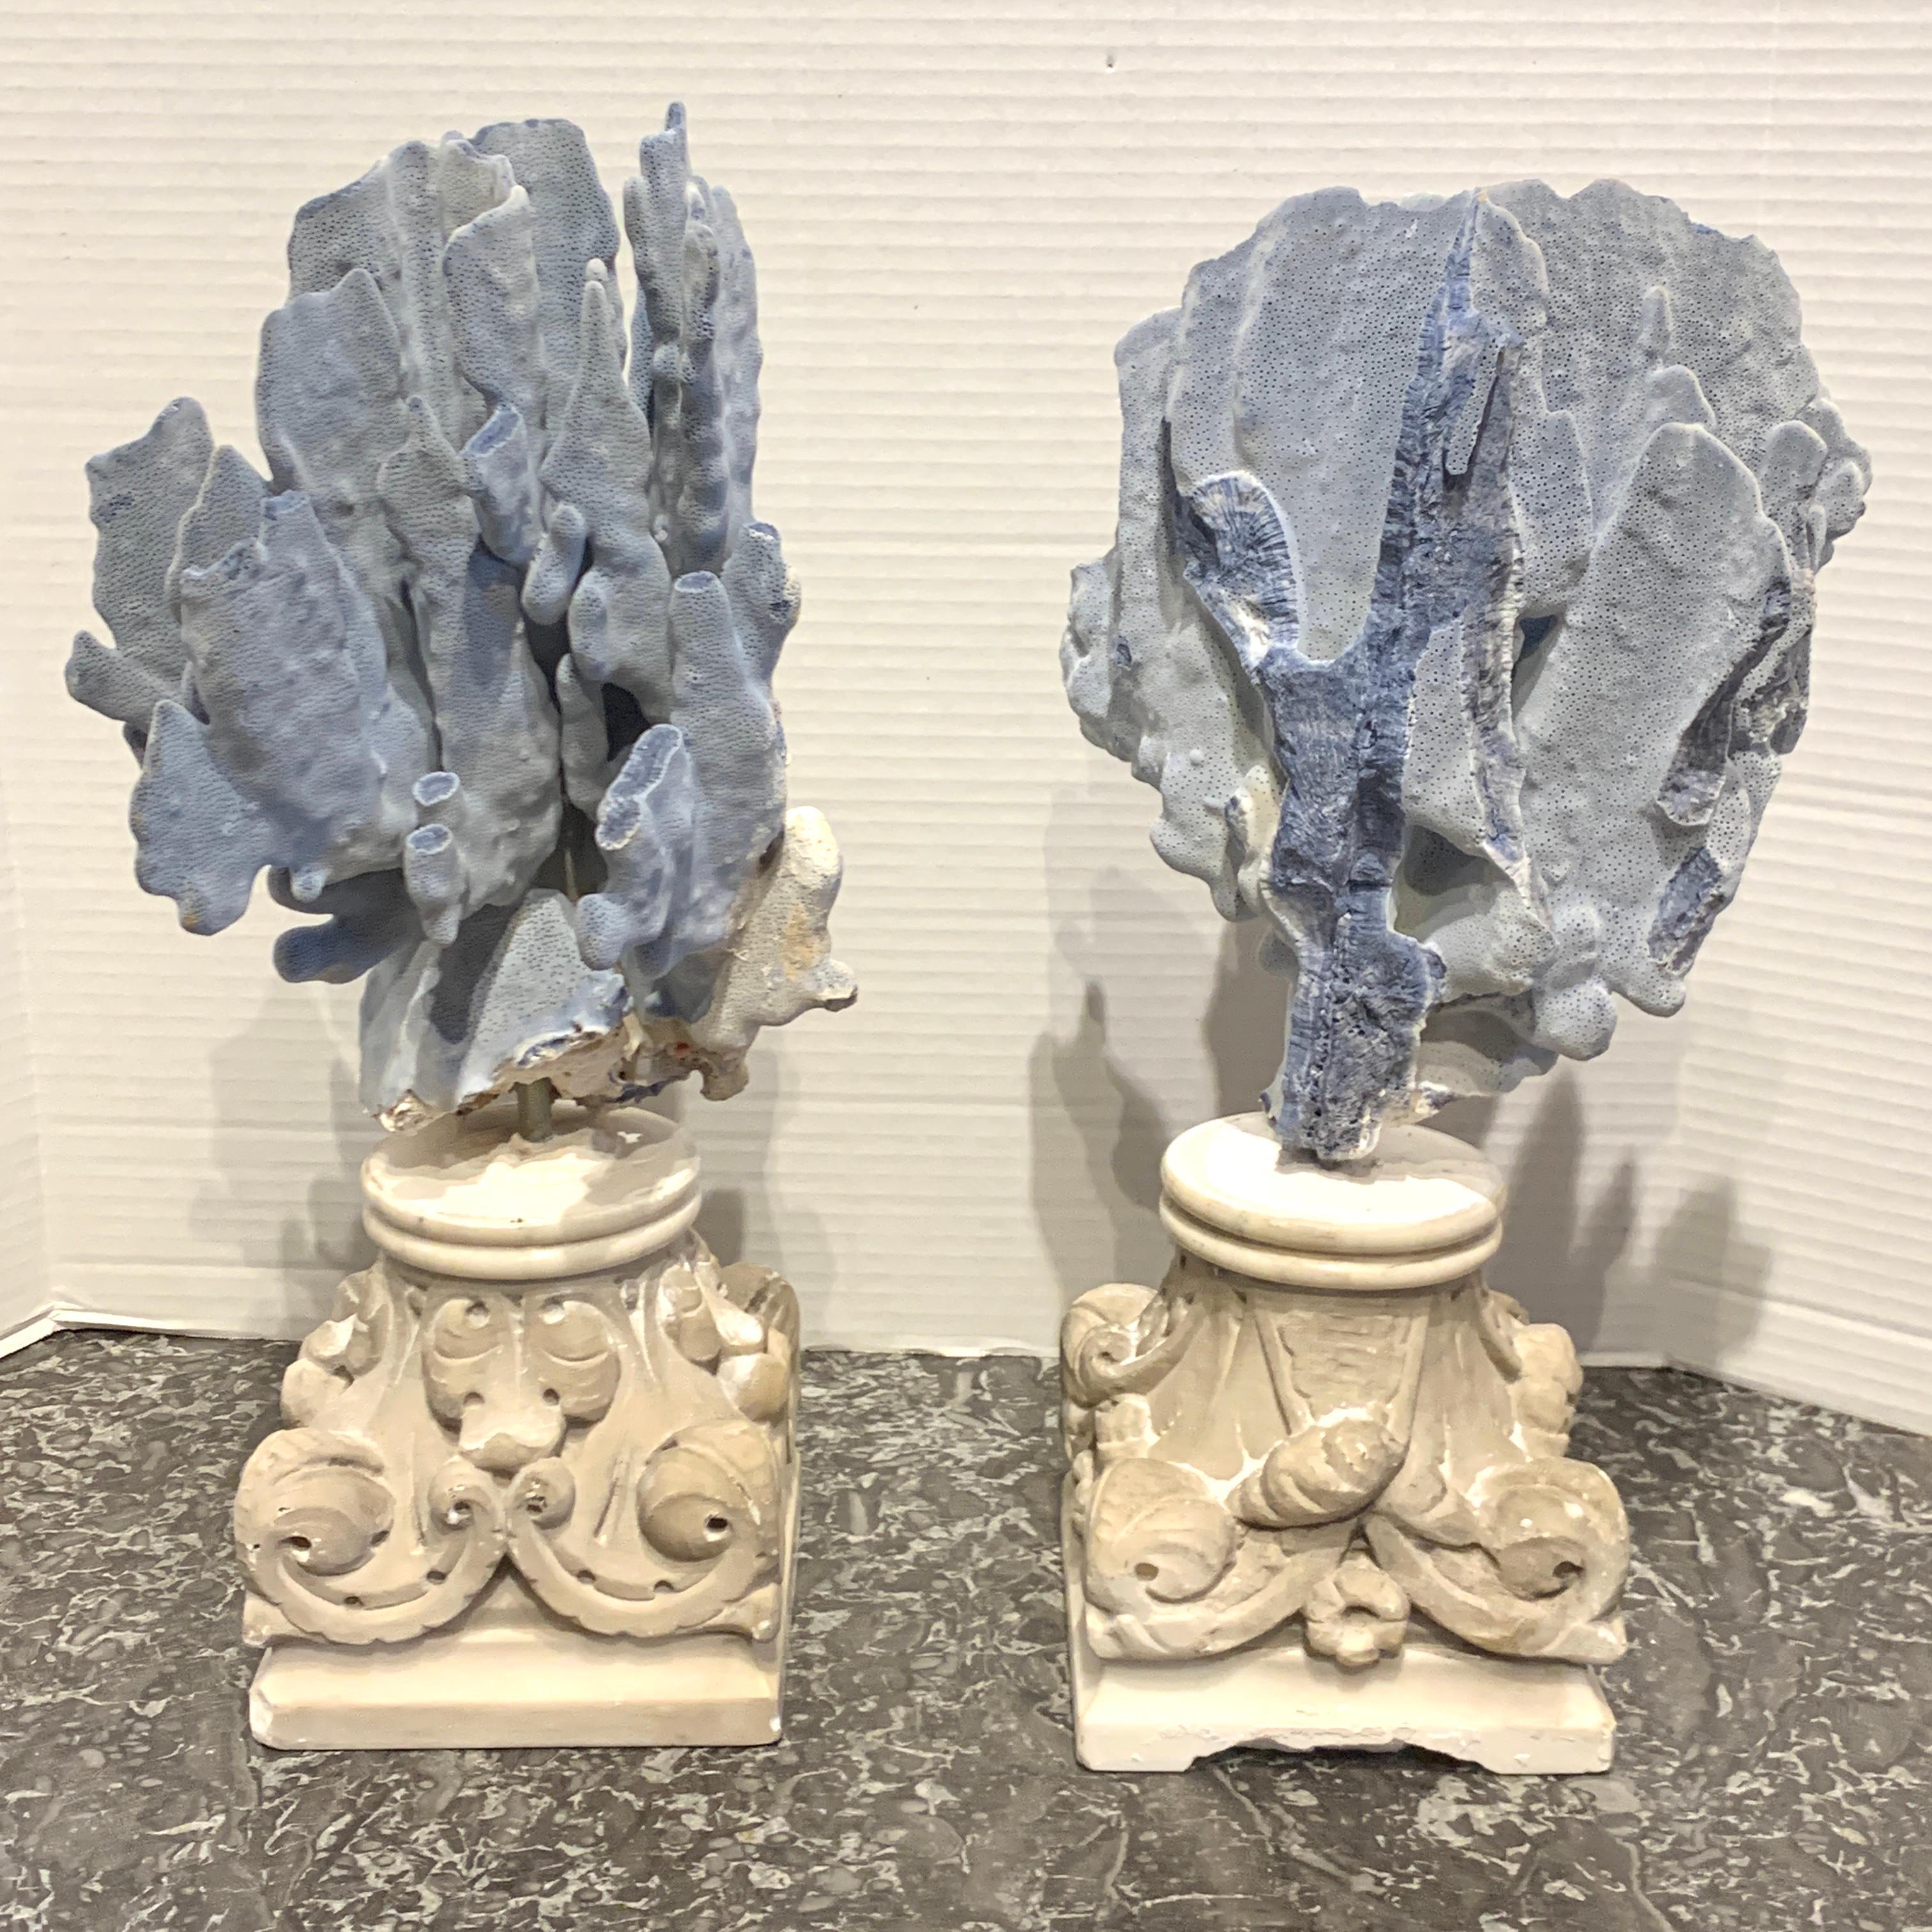 Carved Pair of 19th Century Grand Tour Specimen Blue Coral on Carrera Marble Pedestals